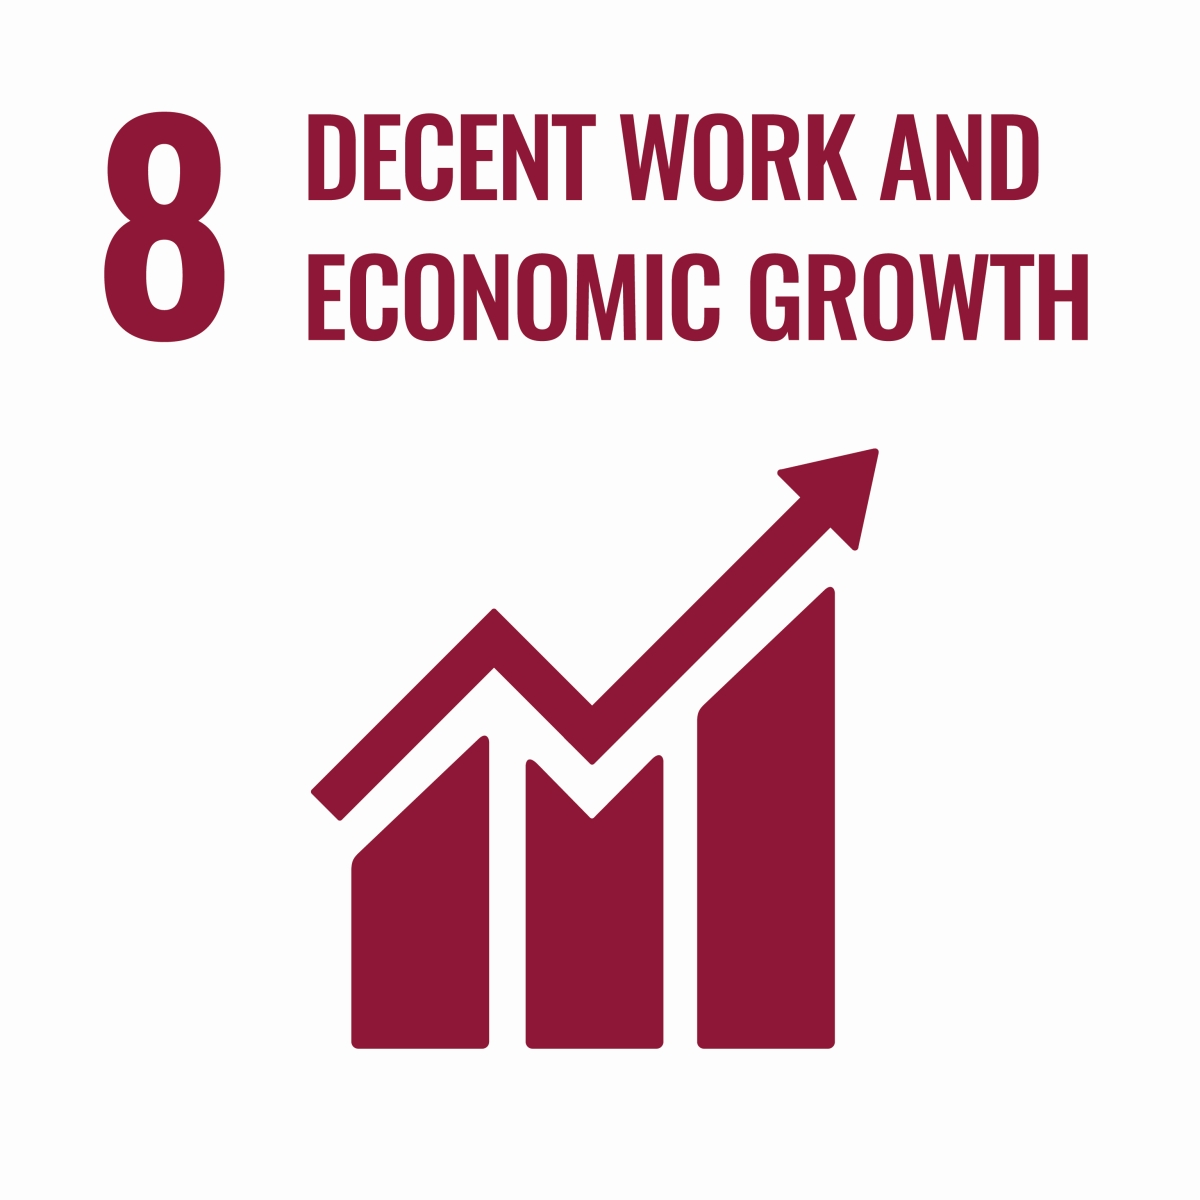 Decent work and economic grwoth